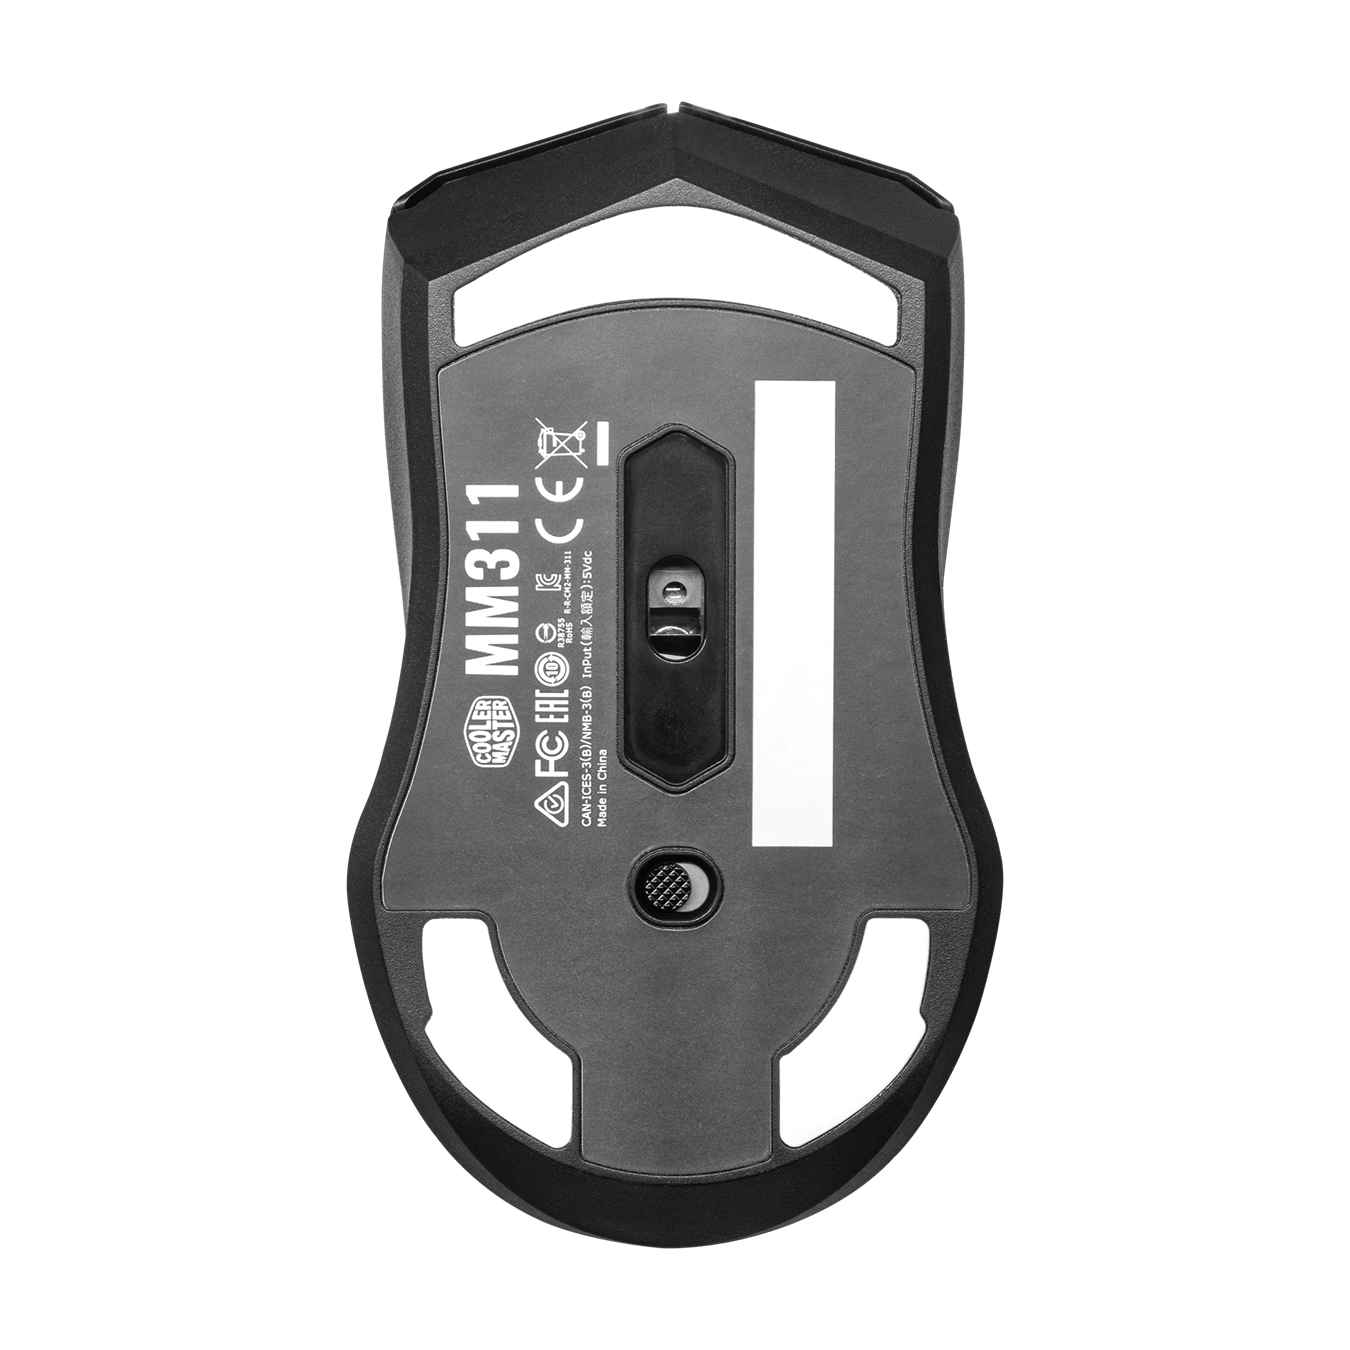 MM311 Wireless Mouse - New, improved software allows you to remap controls, tune your macros and more